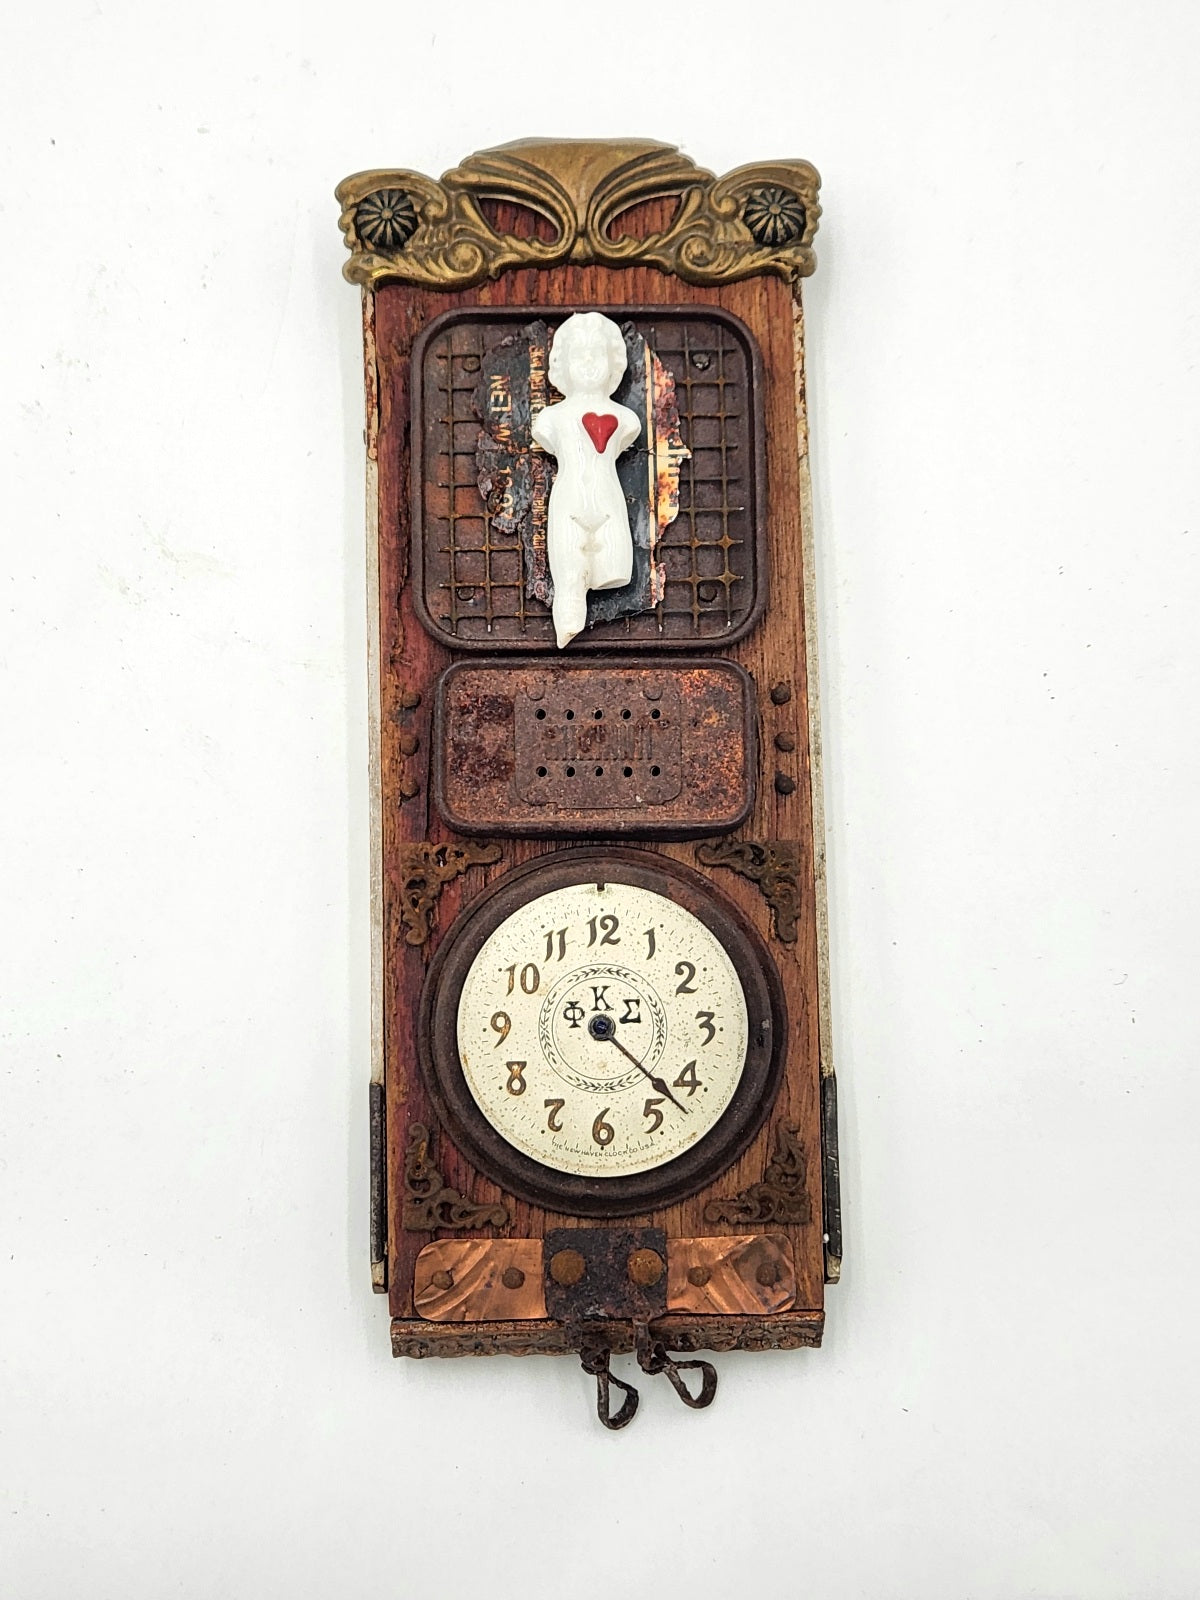 Assemblage Art Angel Heart with Clock